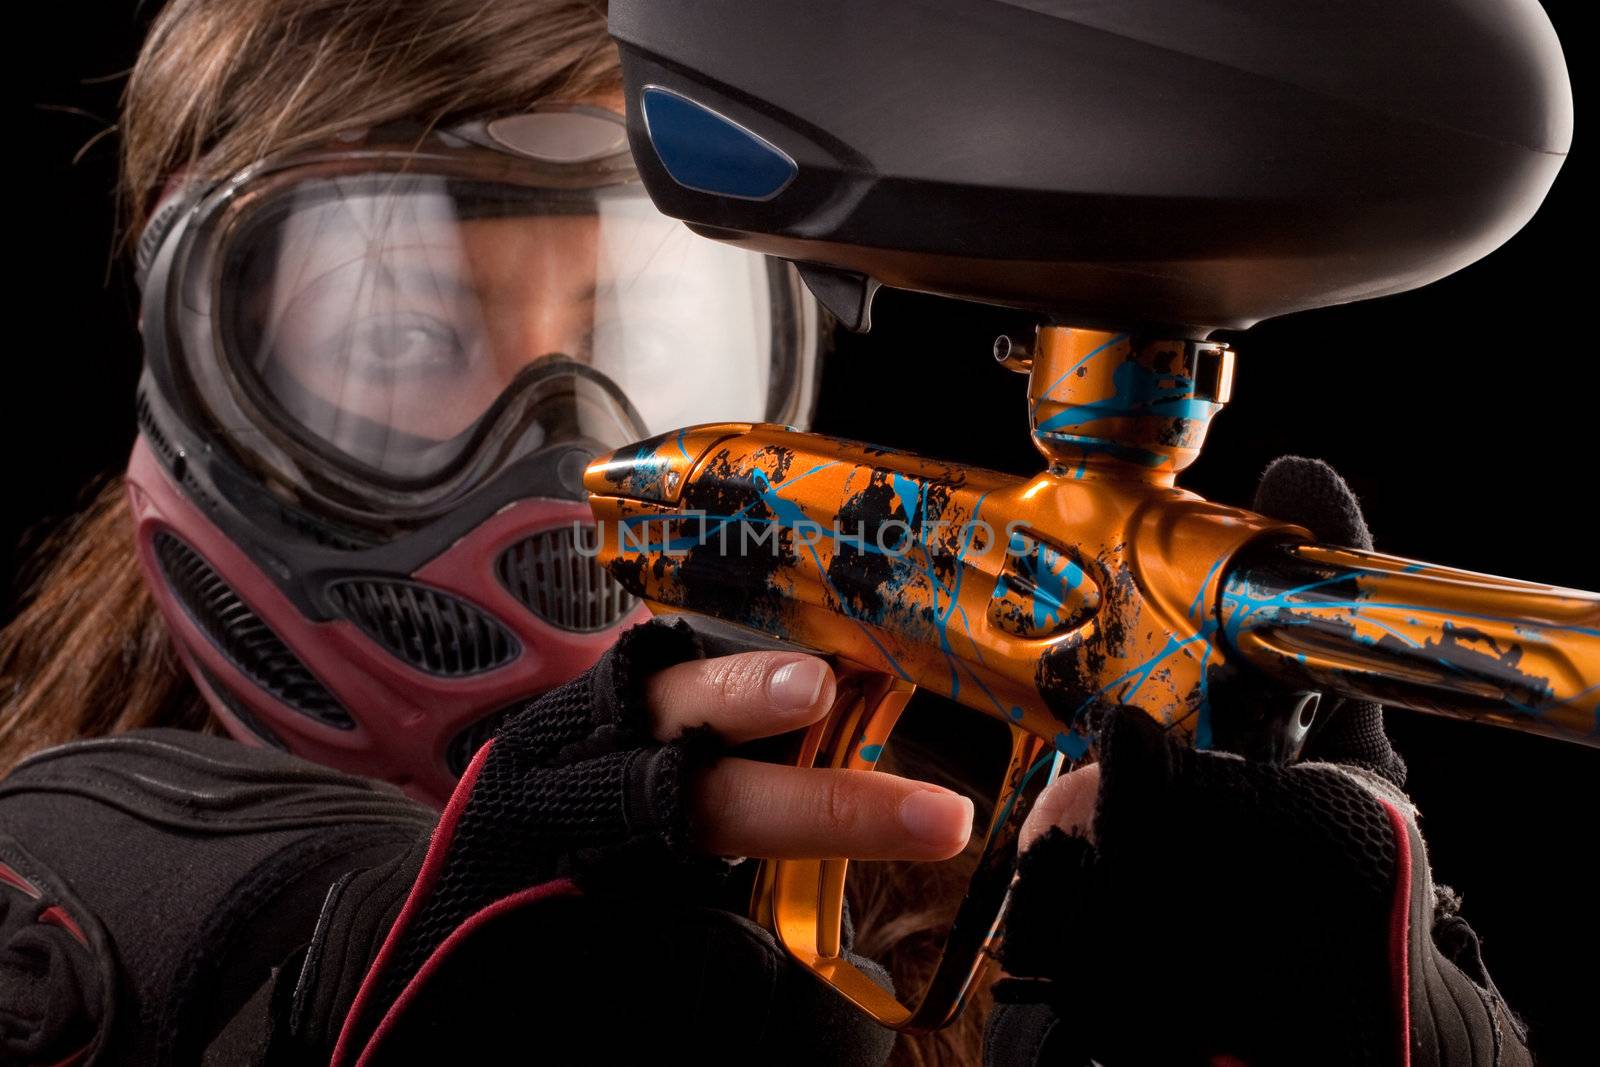 Image of a paintball player in protective helmet aiming the target